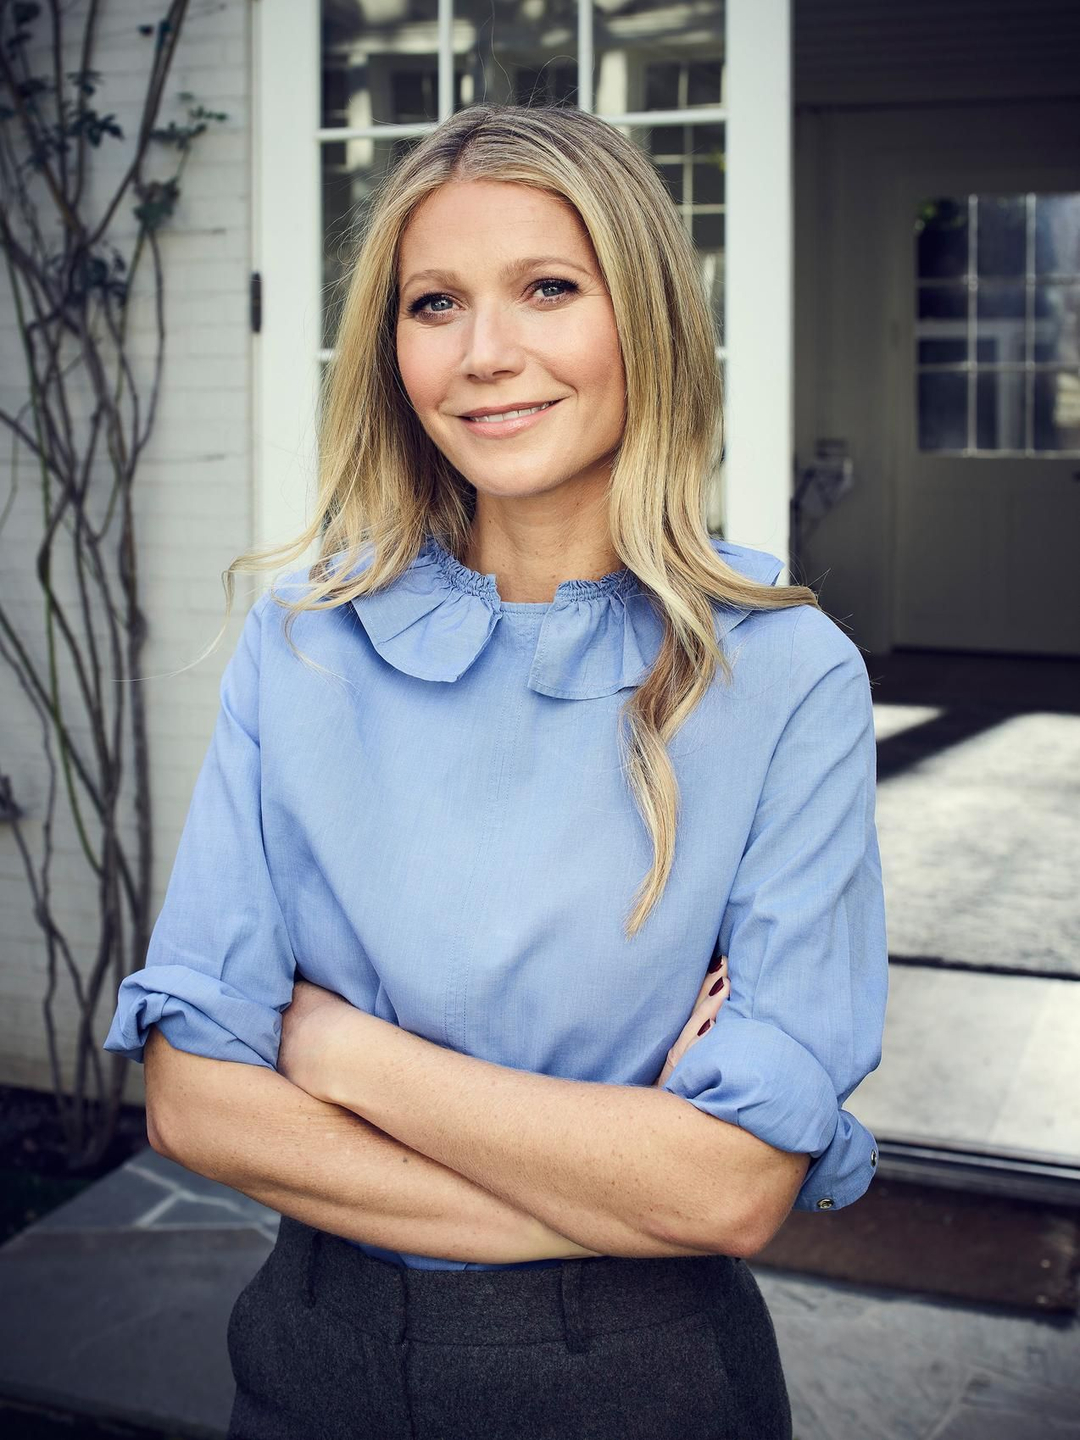 Gwyneth Paltrow how did she became famous